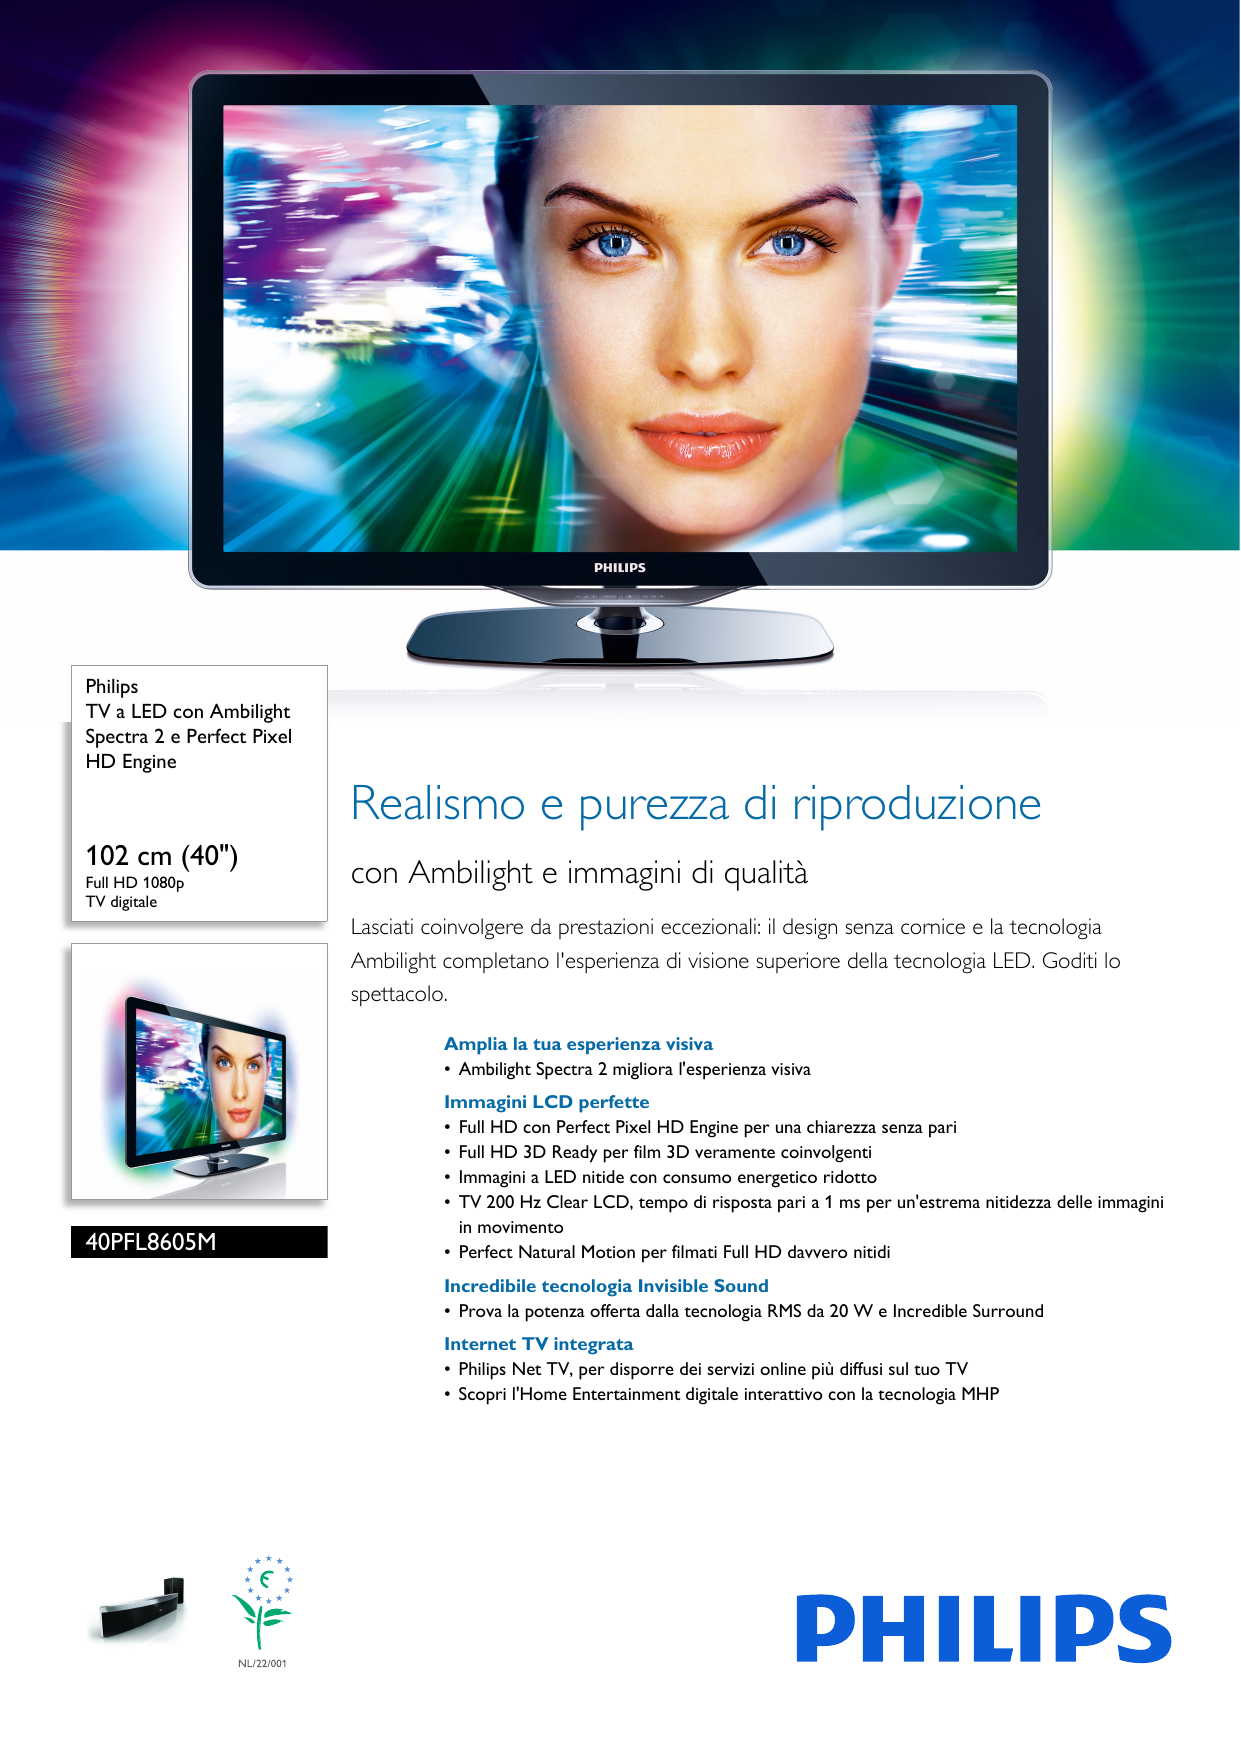 Page 1 of 3 - Philips 40PFL8605M/08 TV A LED Con Ambilight Spectra 2 E Perfect Pixel HD Engine User Manual Scheda Tecnica 40pfl8605m 08 Pss Itait